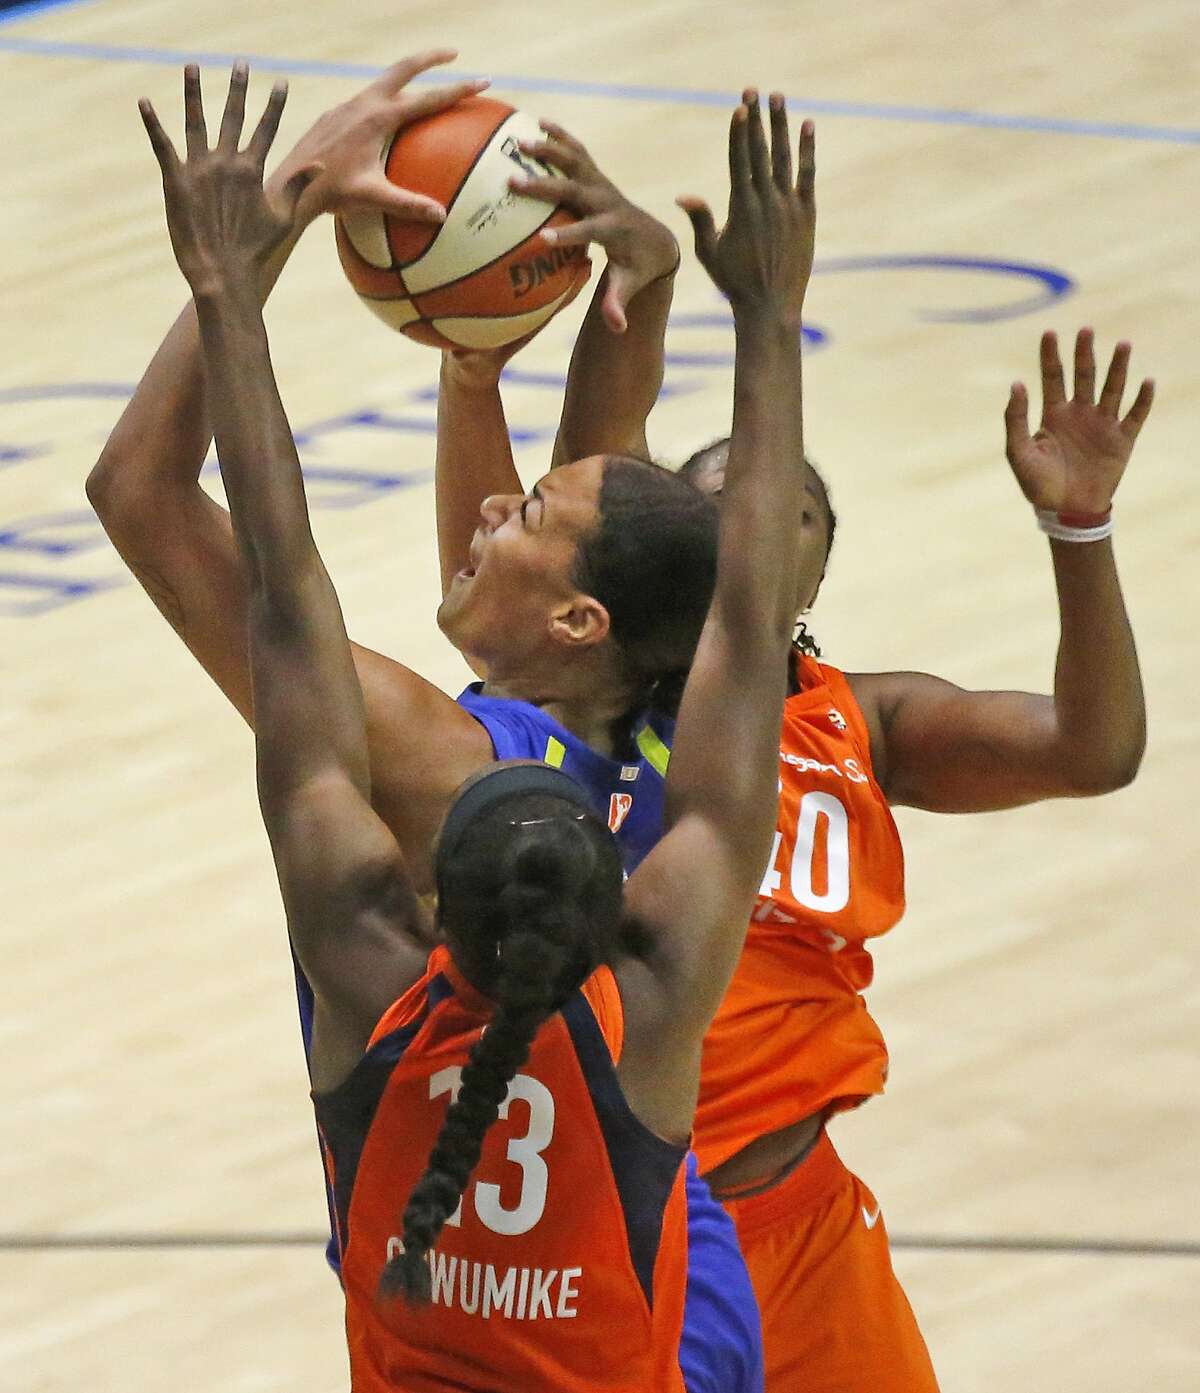 Dallas Wings center Liz Cambage (8) shoots between Connecticut's Chiney Ogwumike (13) and Courtney Williams (10) in the fourth quarter of a WNBA basketball game in Arlington, Texas, Sunday, July 22, 2018. (Louis DeLuca/The Dallas Morning News via AP)